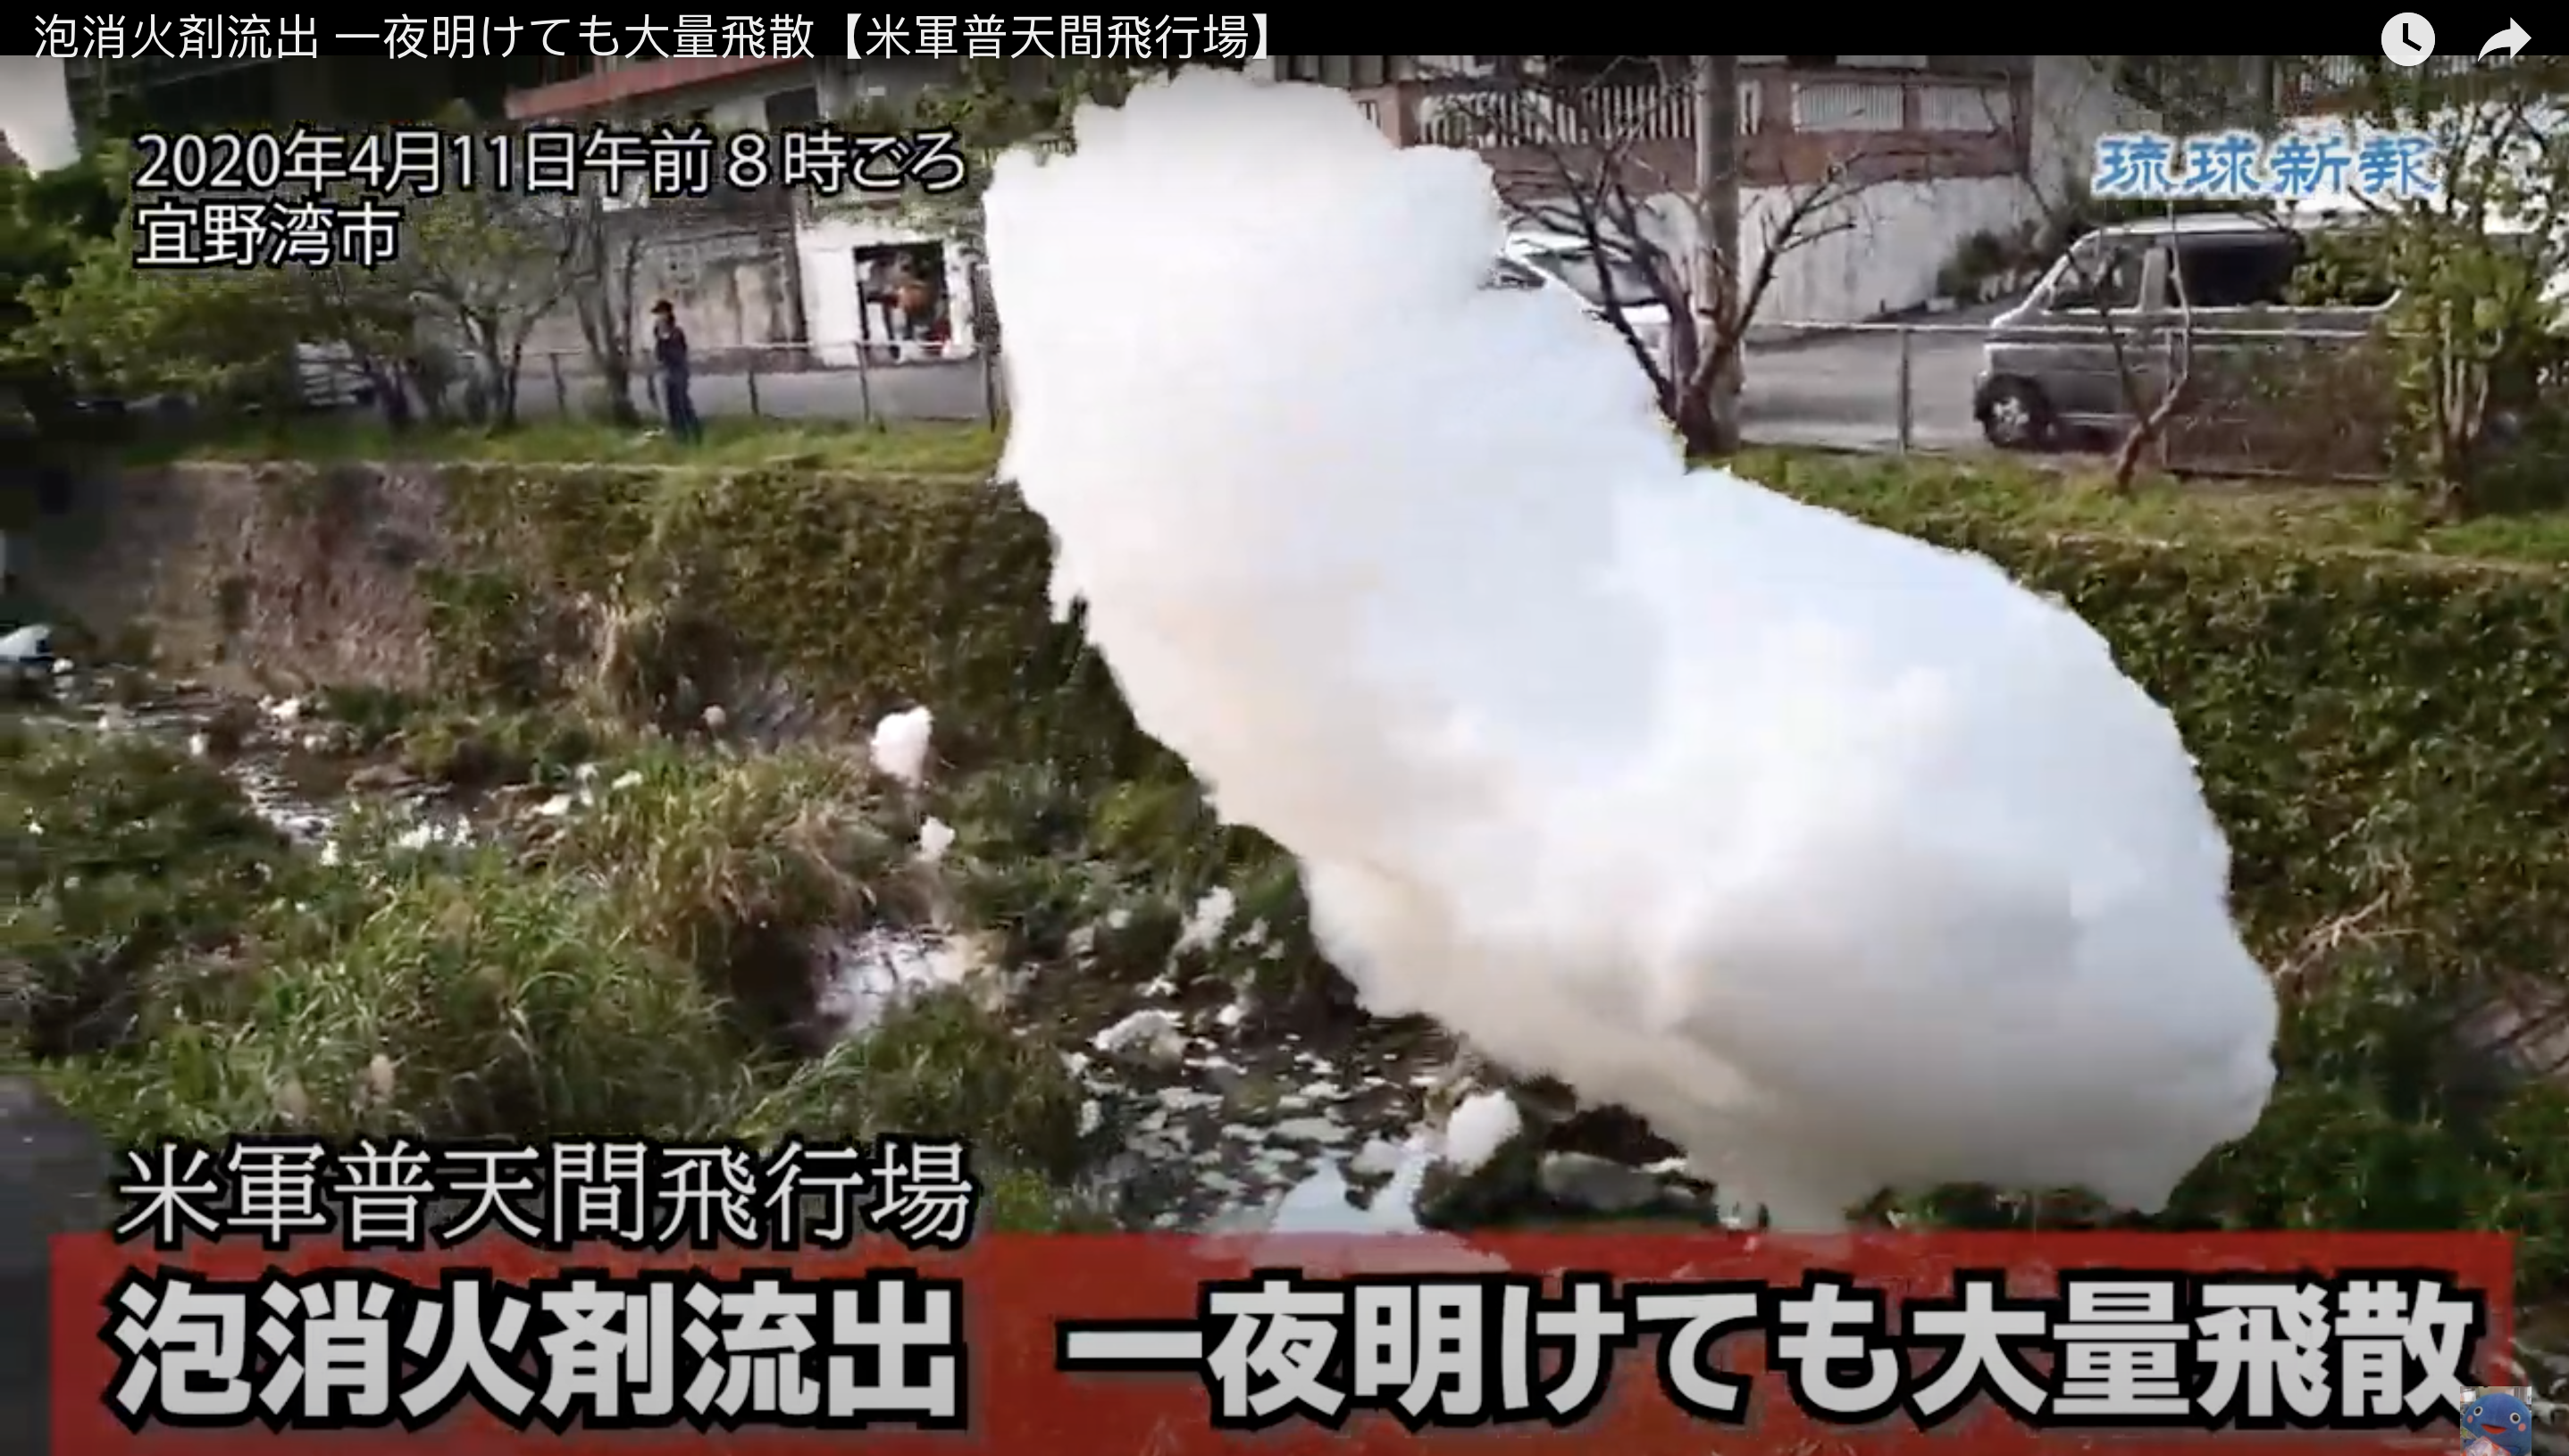 Must-watch 45- second video showing a massive release of PFAS-laden foam from the Marine Corps Air Station Futenma in U.S.-occupied Okinawa on April 10. The base discharged huge, carcinogenic airborne bubbles to settle into residential neighborhoods.